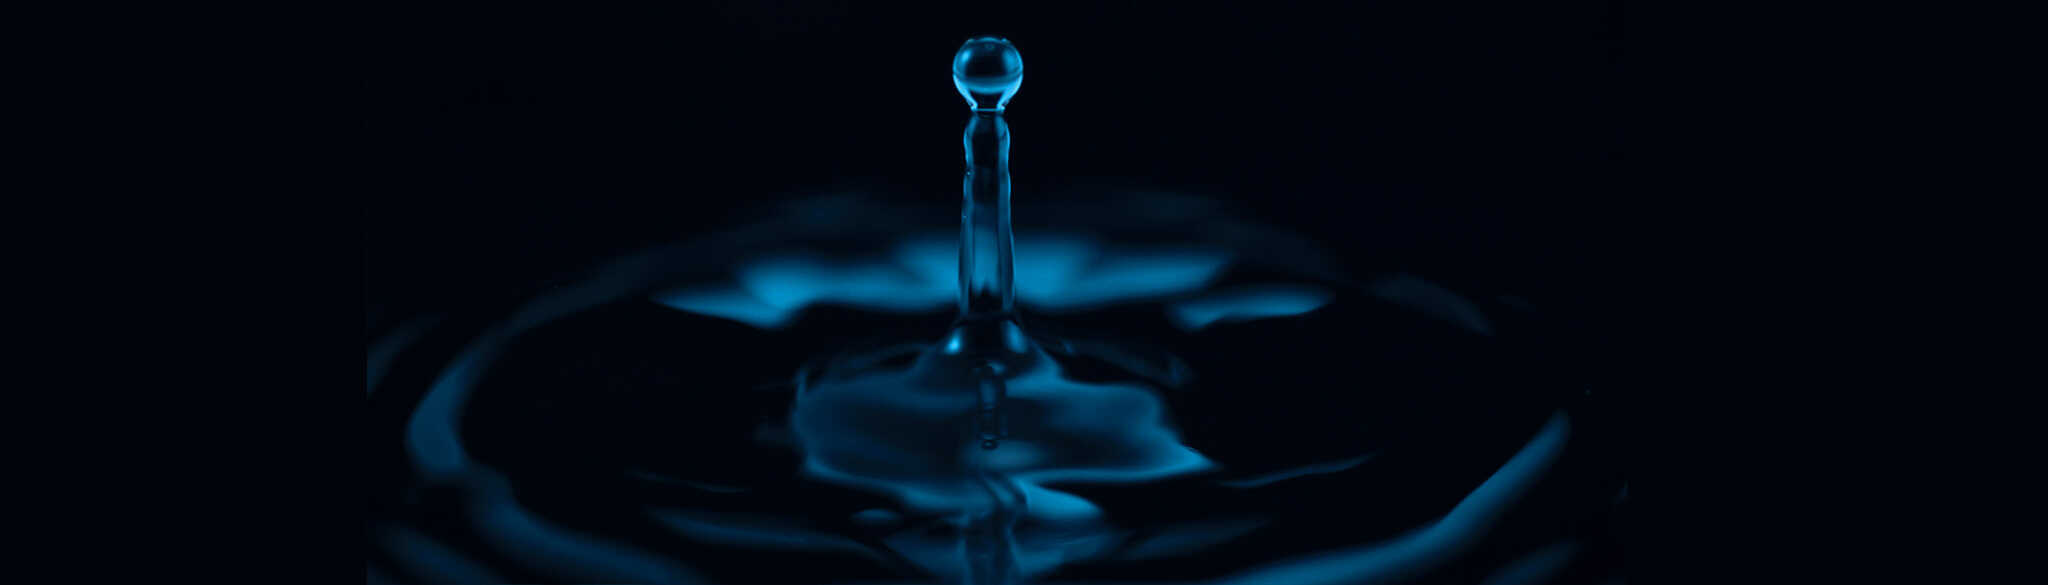 A water drop falls onto a puddle but the photo is upside down